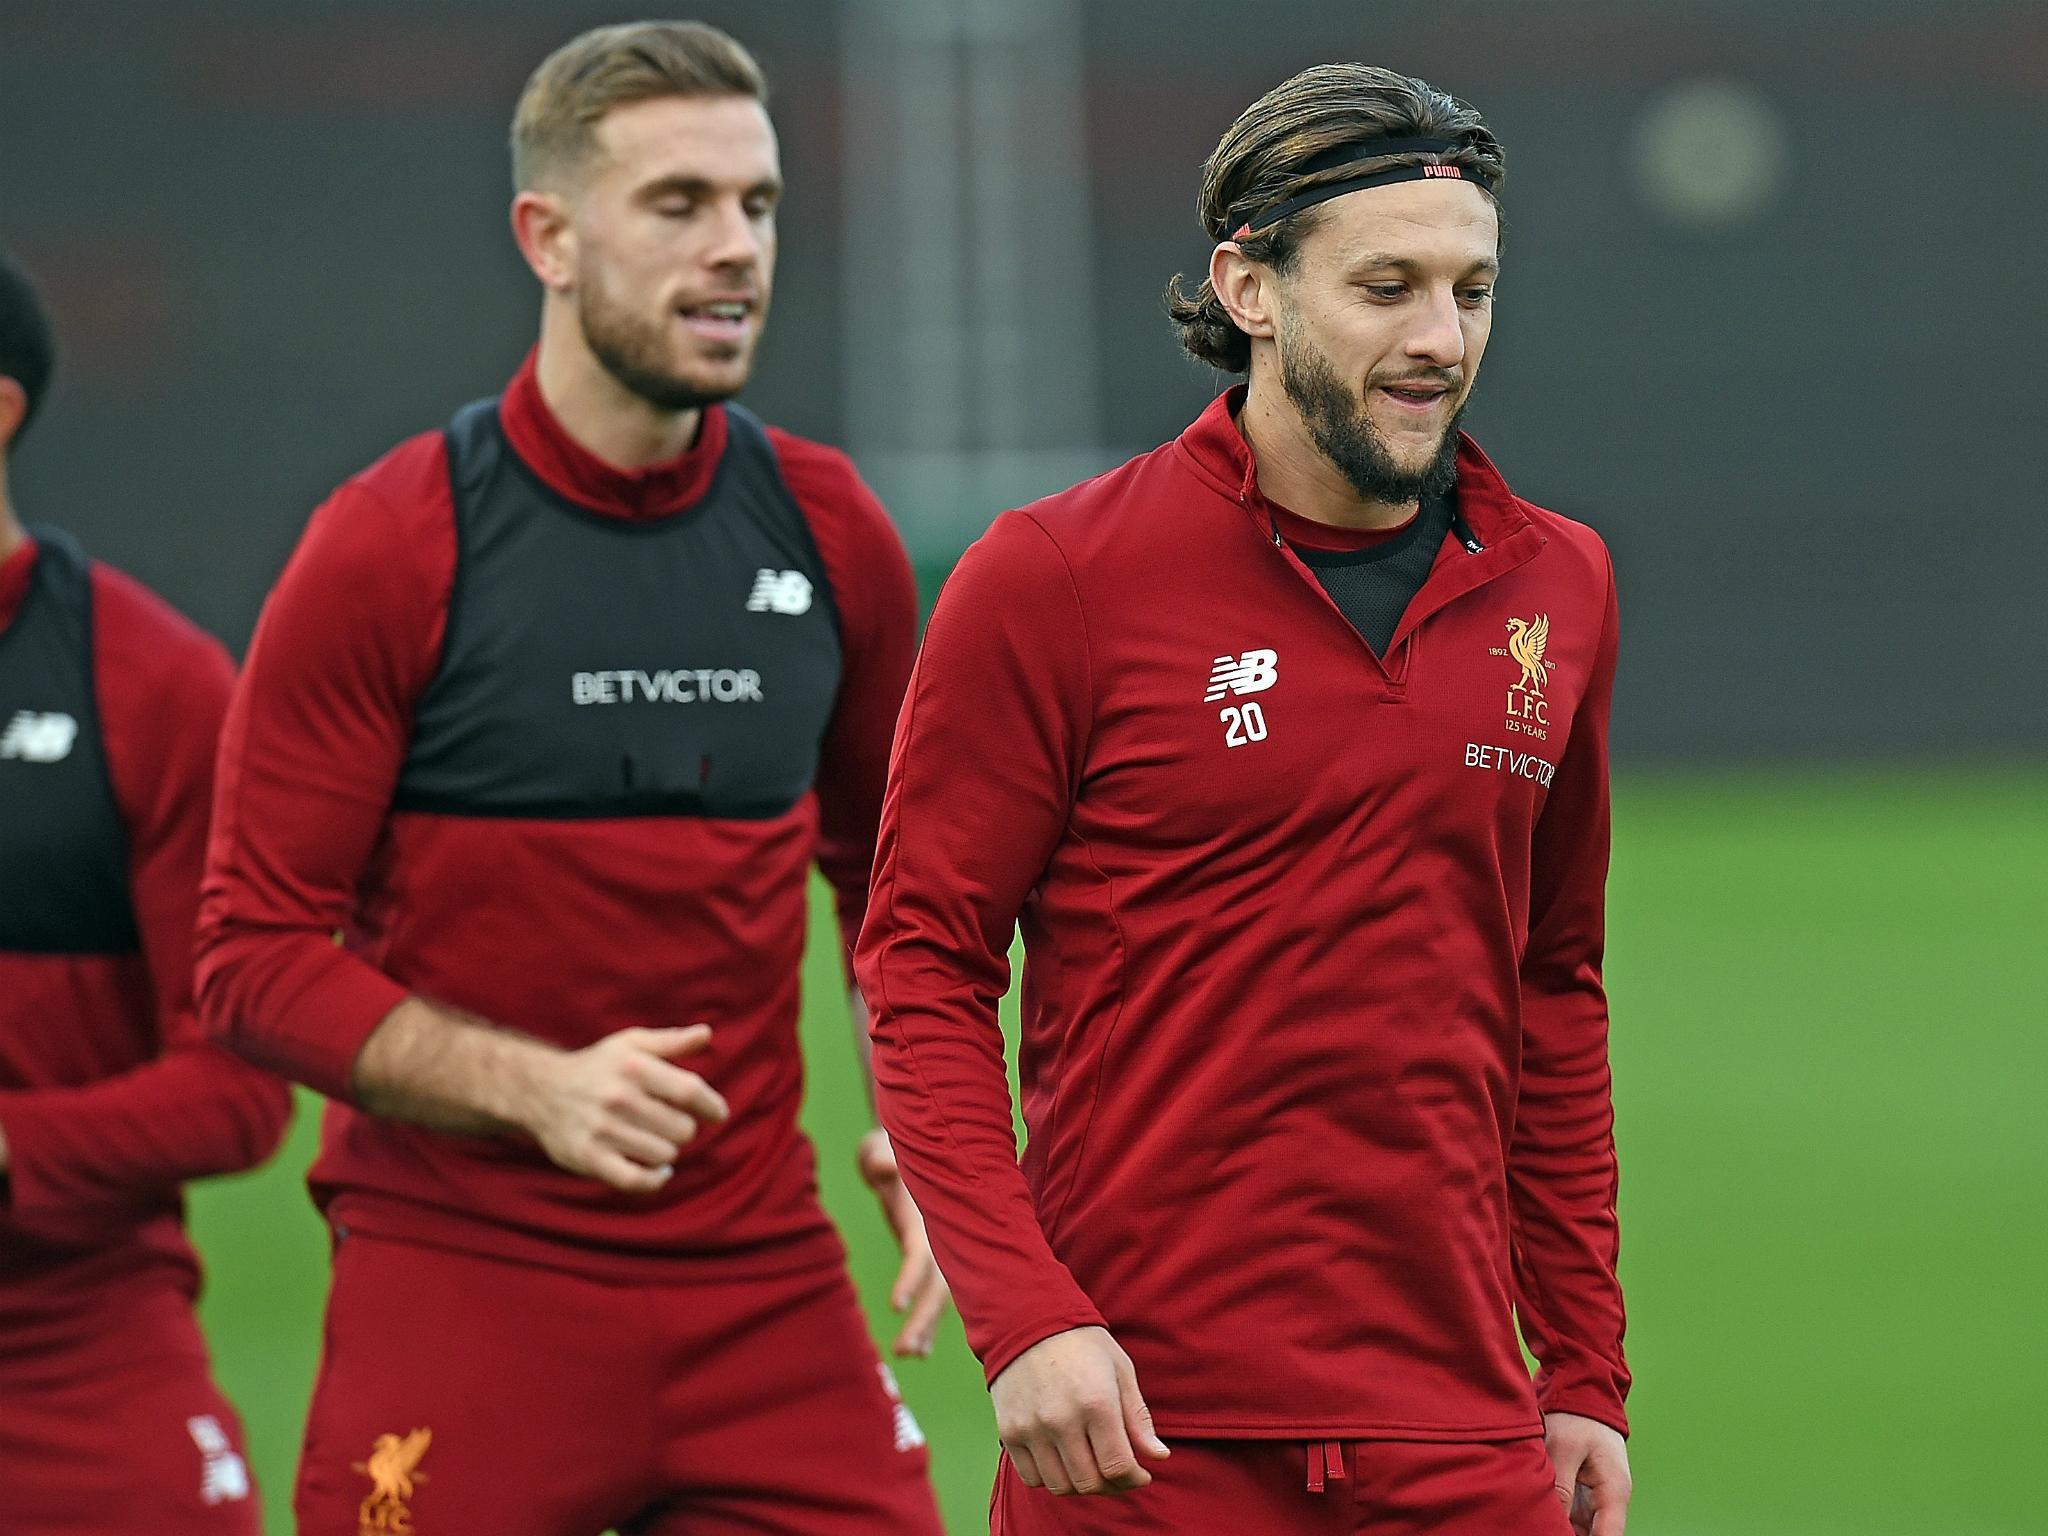 Adam Lallana has returned to full training ahead of Liverpool's clash with Southampton